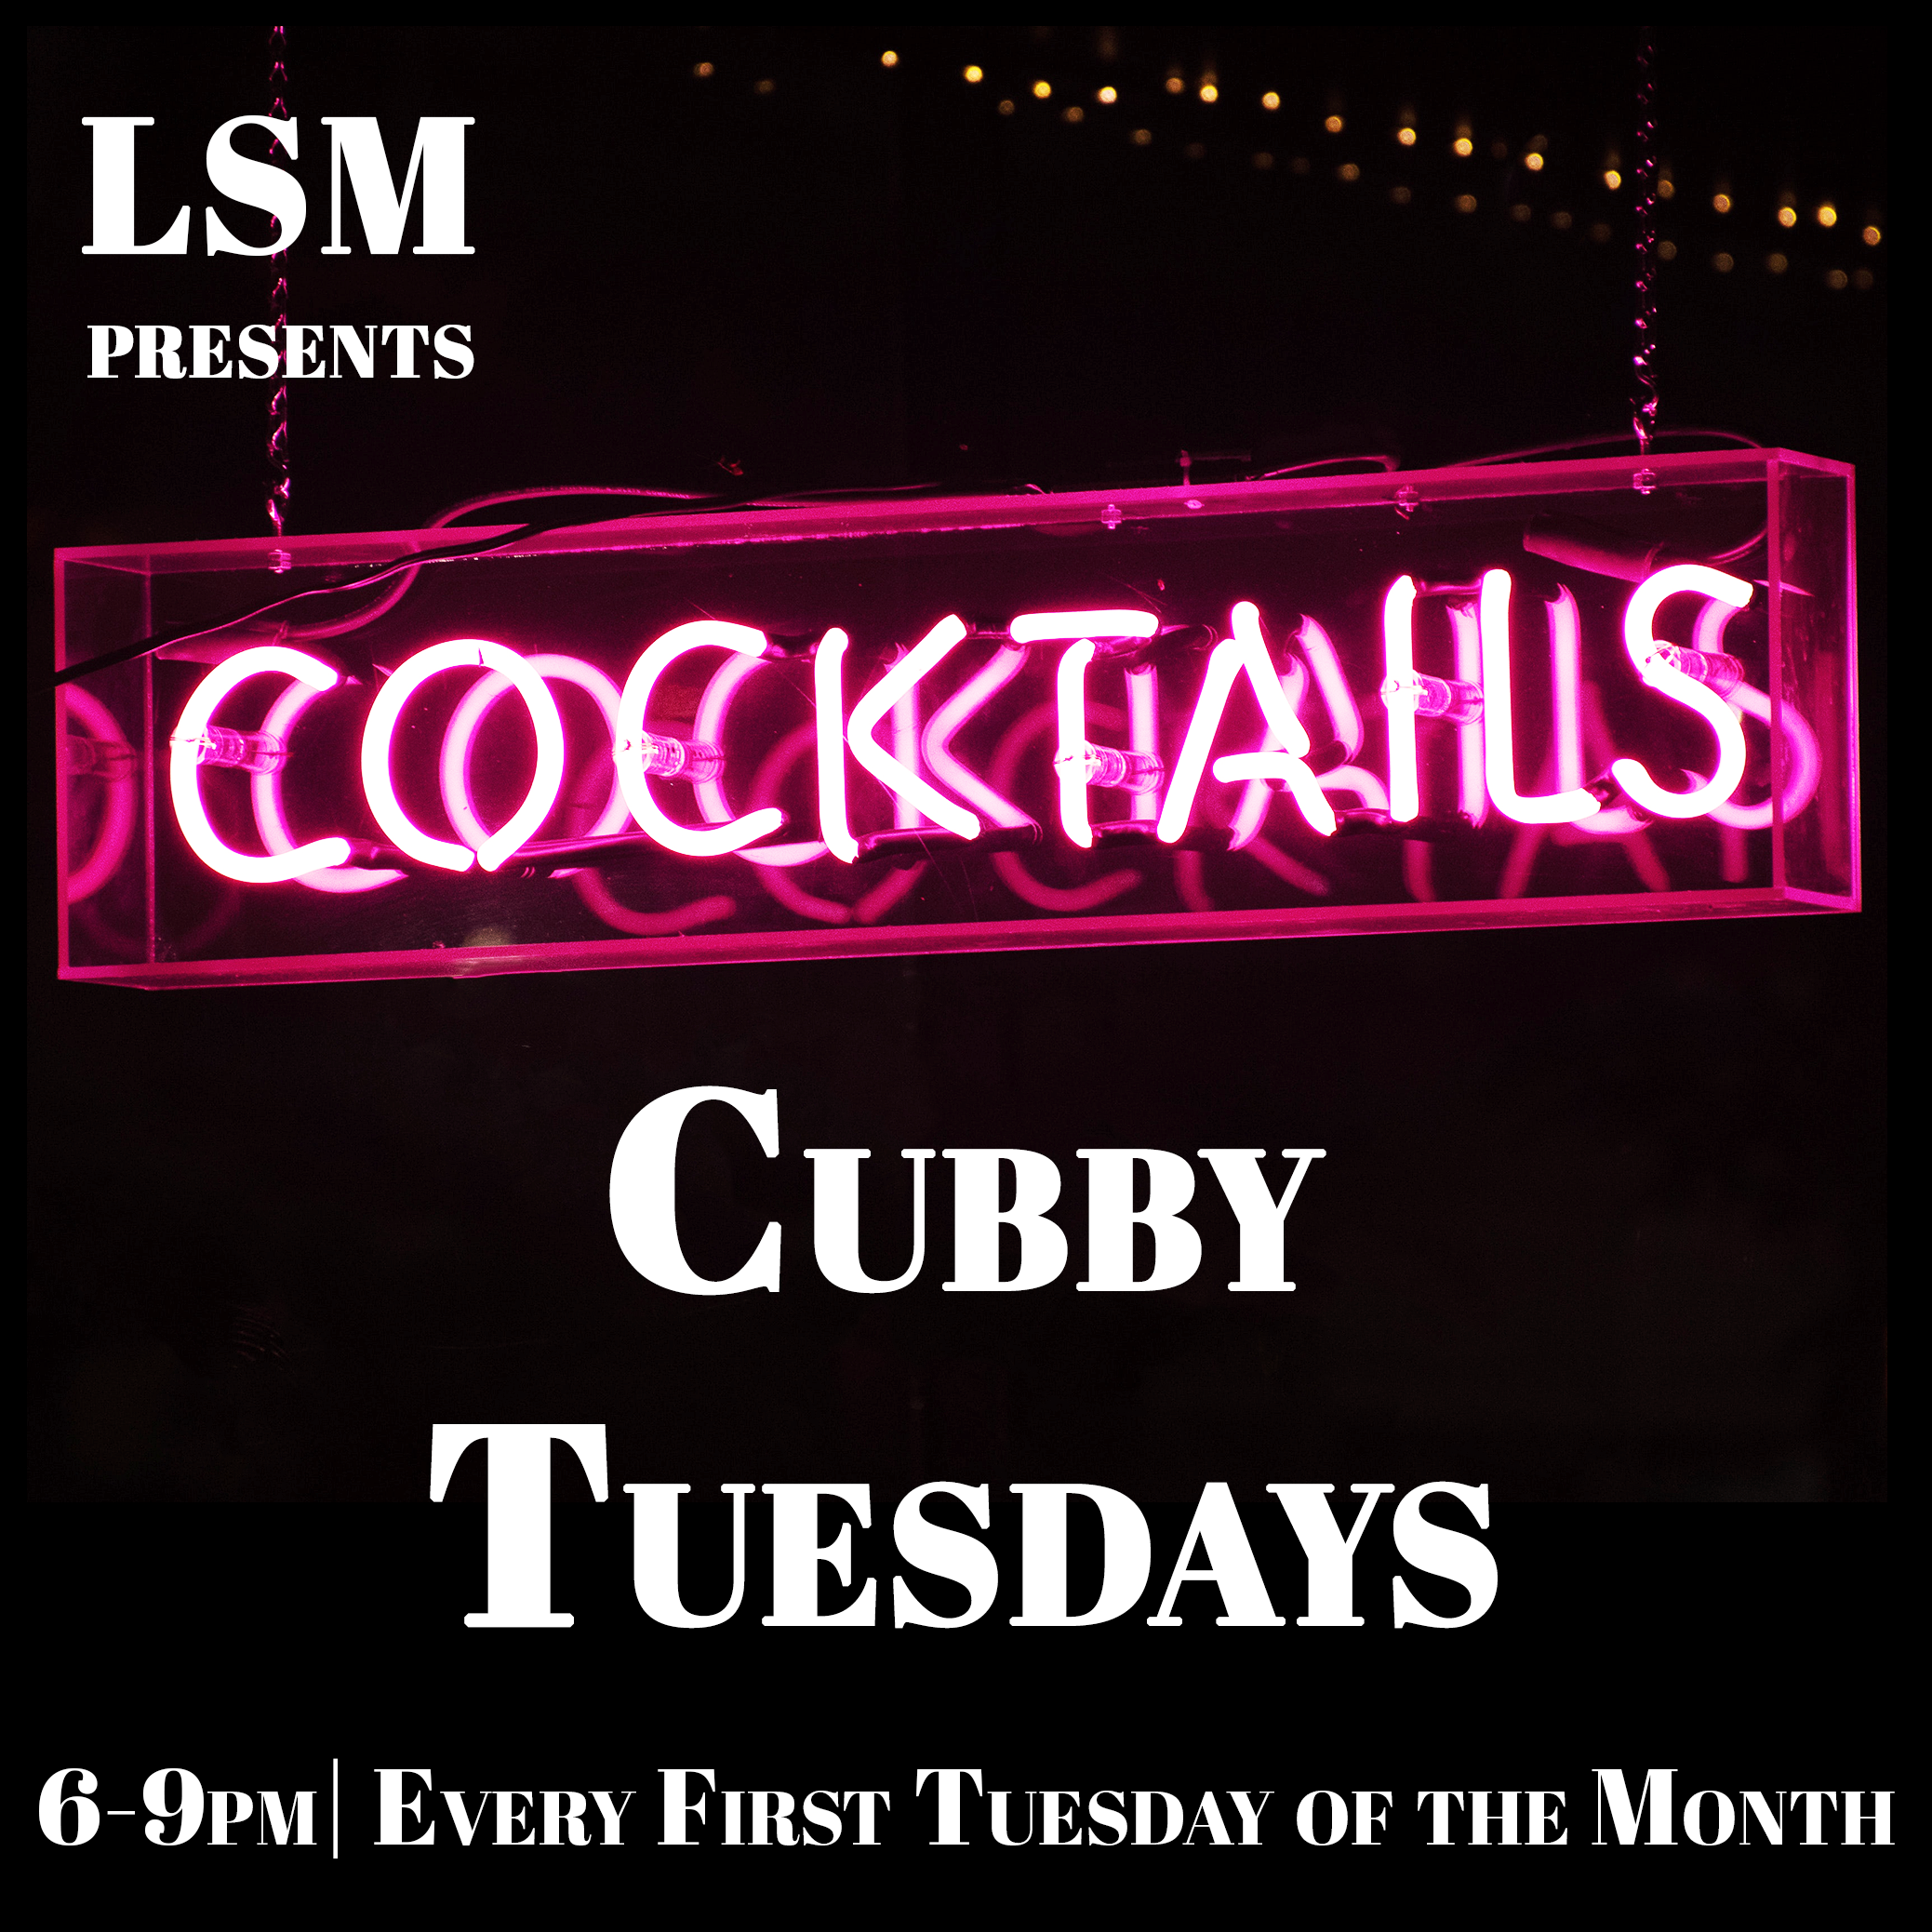 An ad for LSM Presents - Cubby Tuesdays. The image is of pink neon sign with the word cocktails.